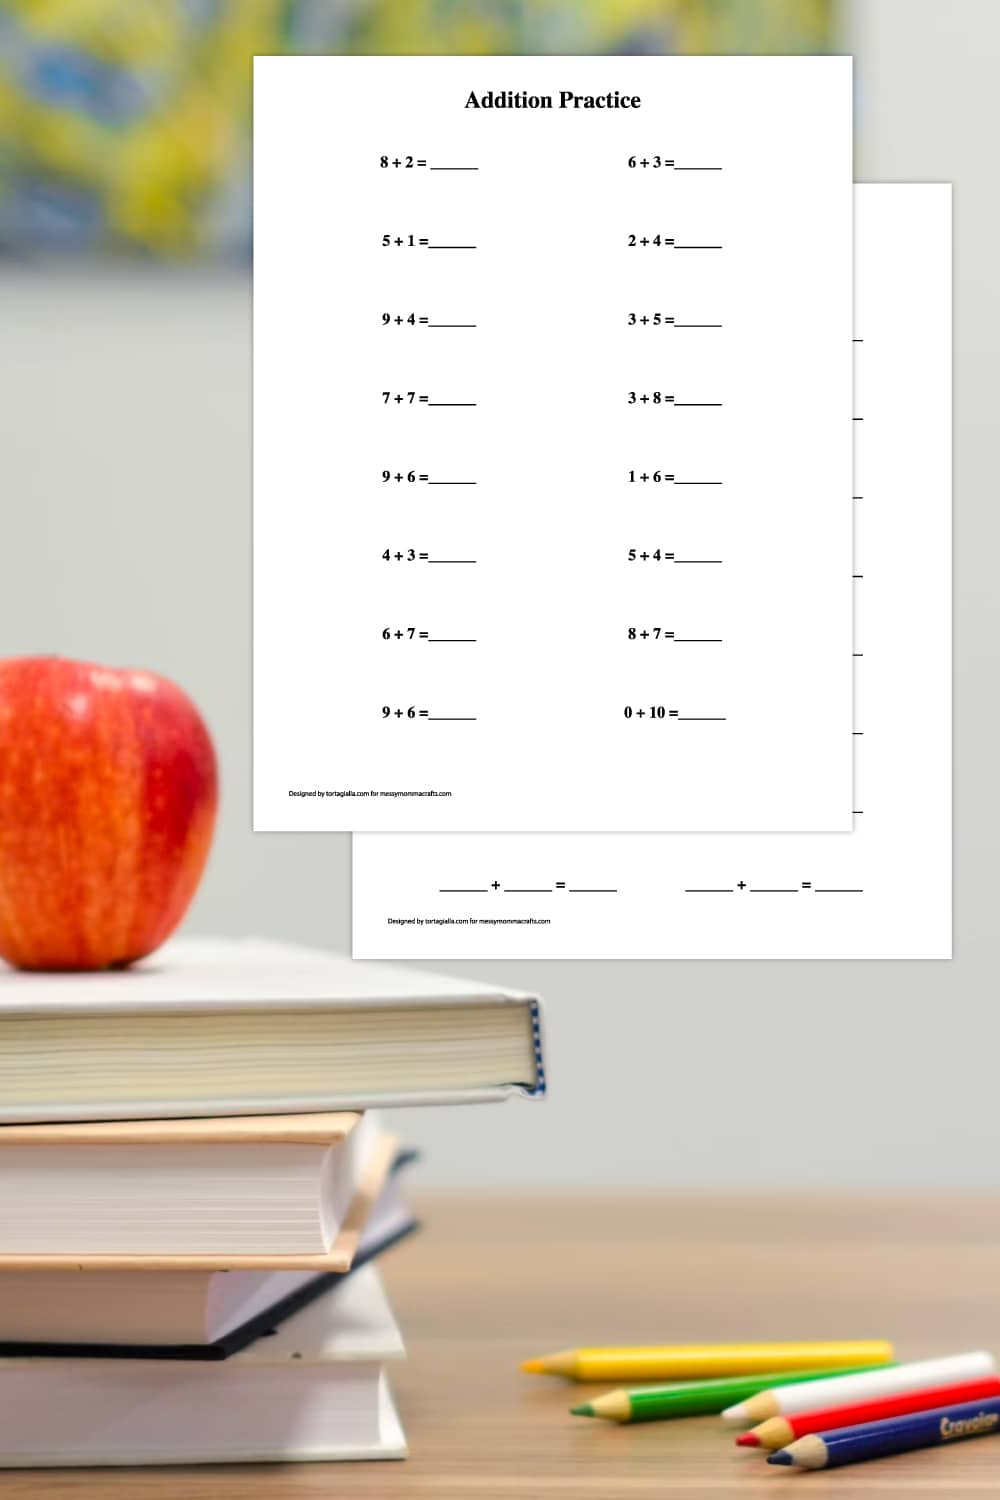 Background of classroom with desk with books and apple on top and colored pencils on the right, with preview of math worksheets in upper right. 